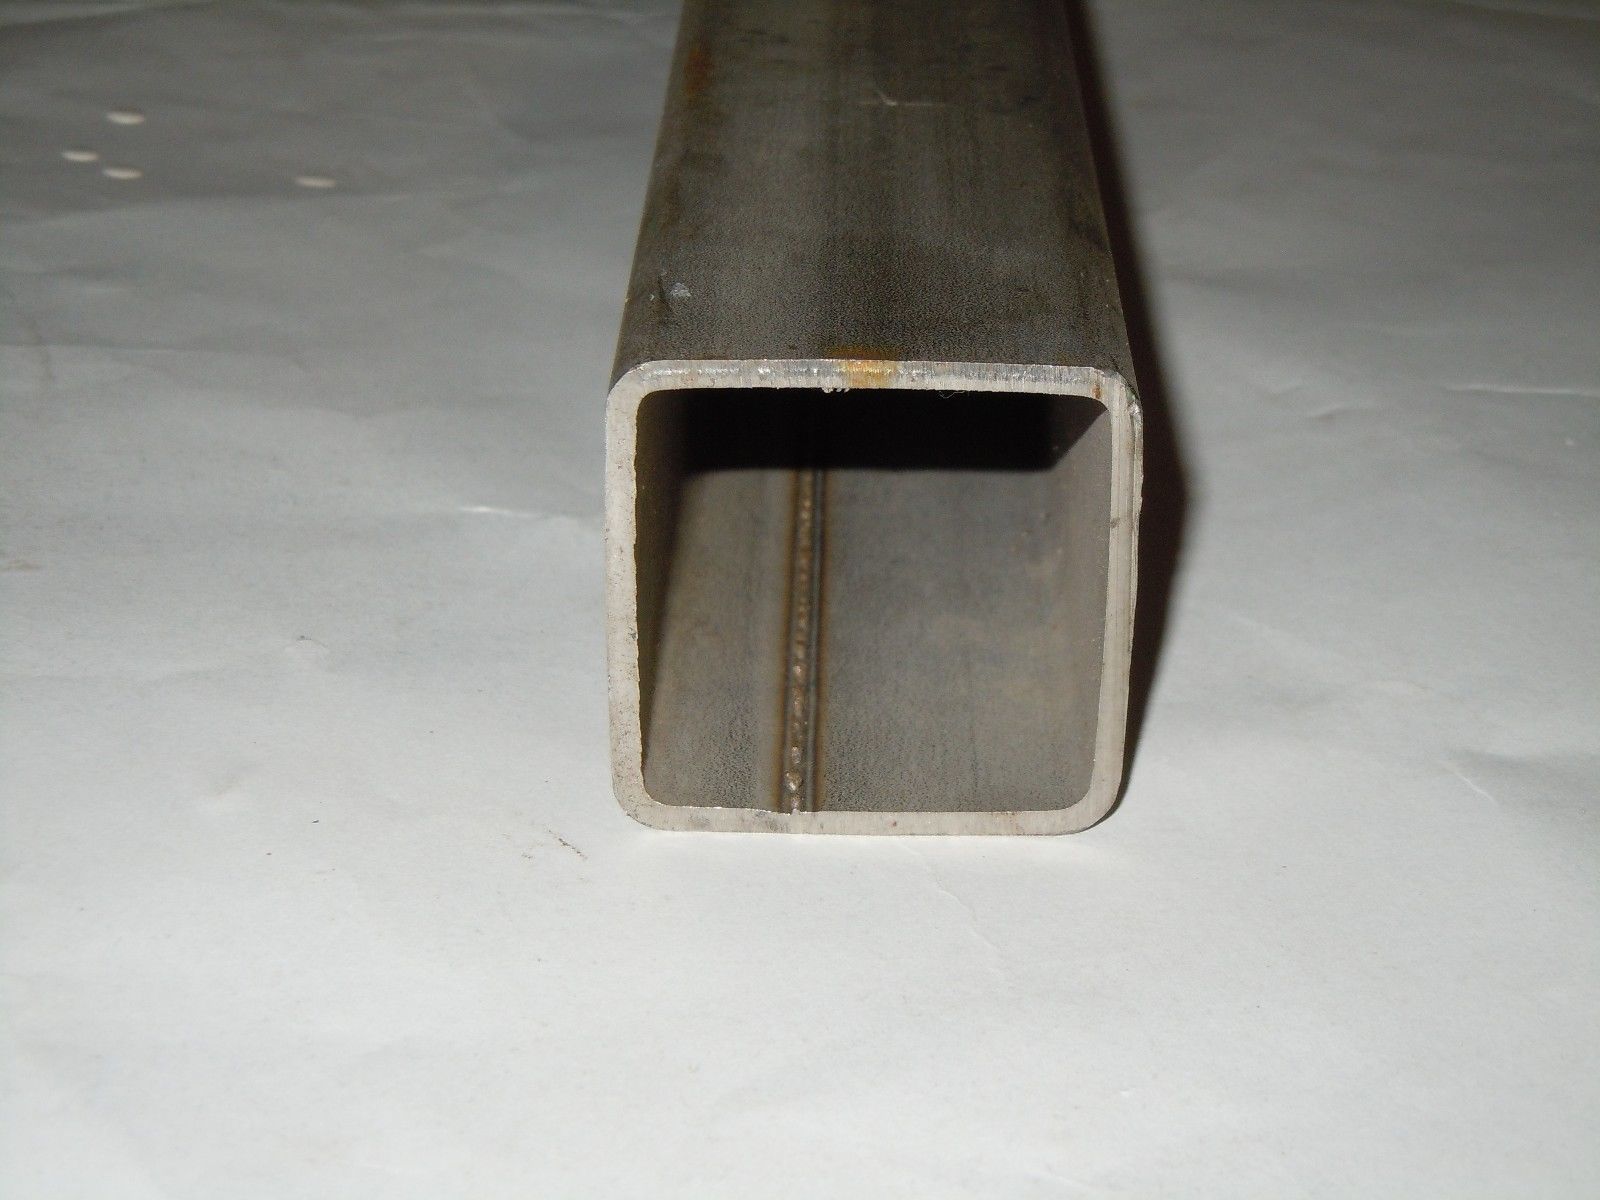 Astm steel profile ms square tube galvanized square and rectangular steel pipe